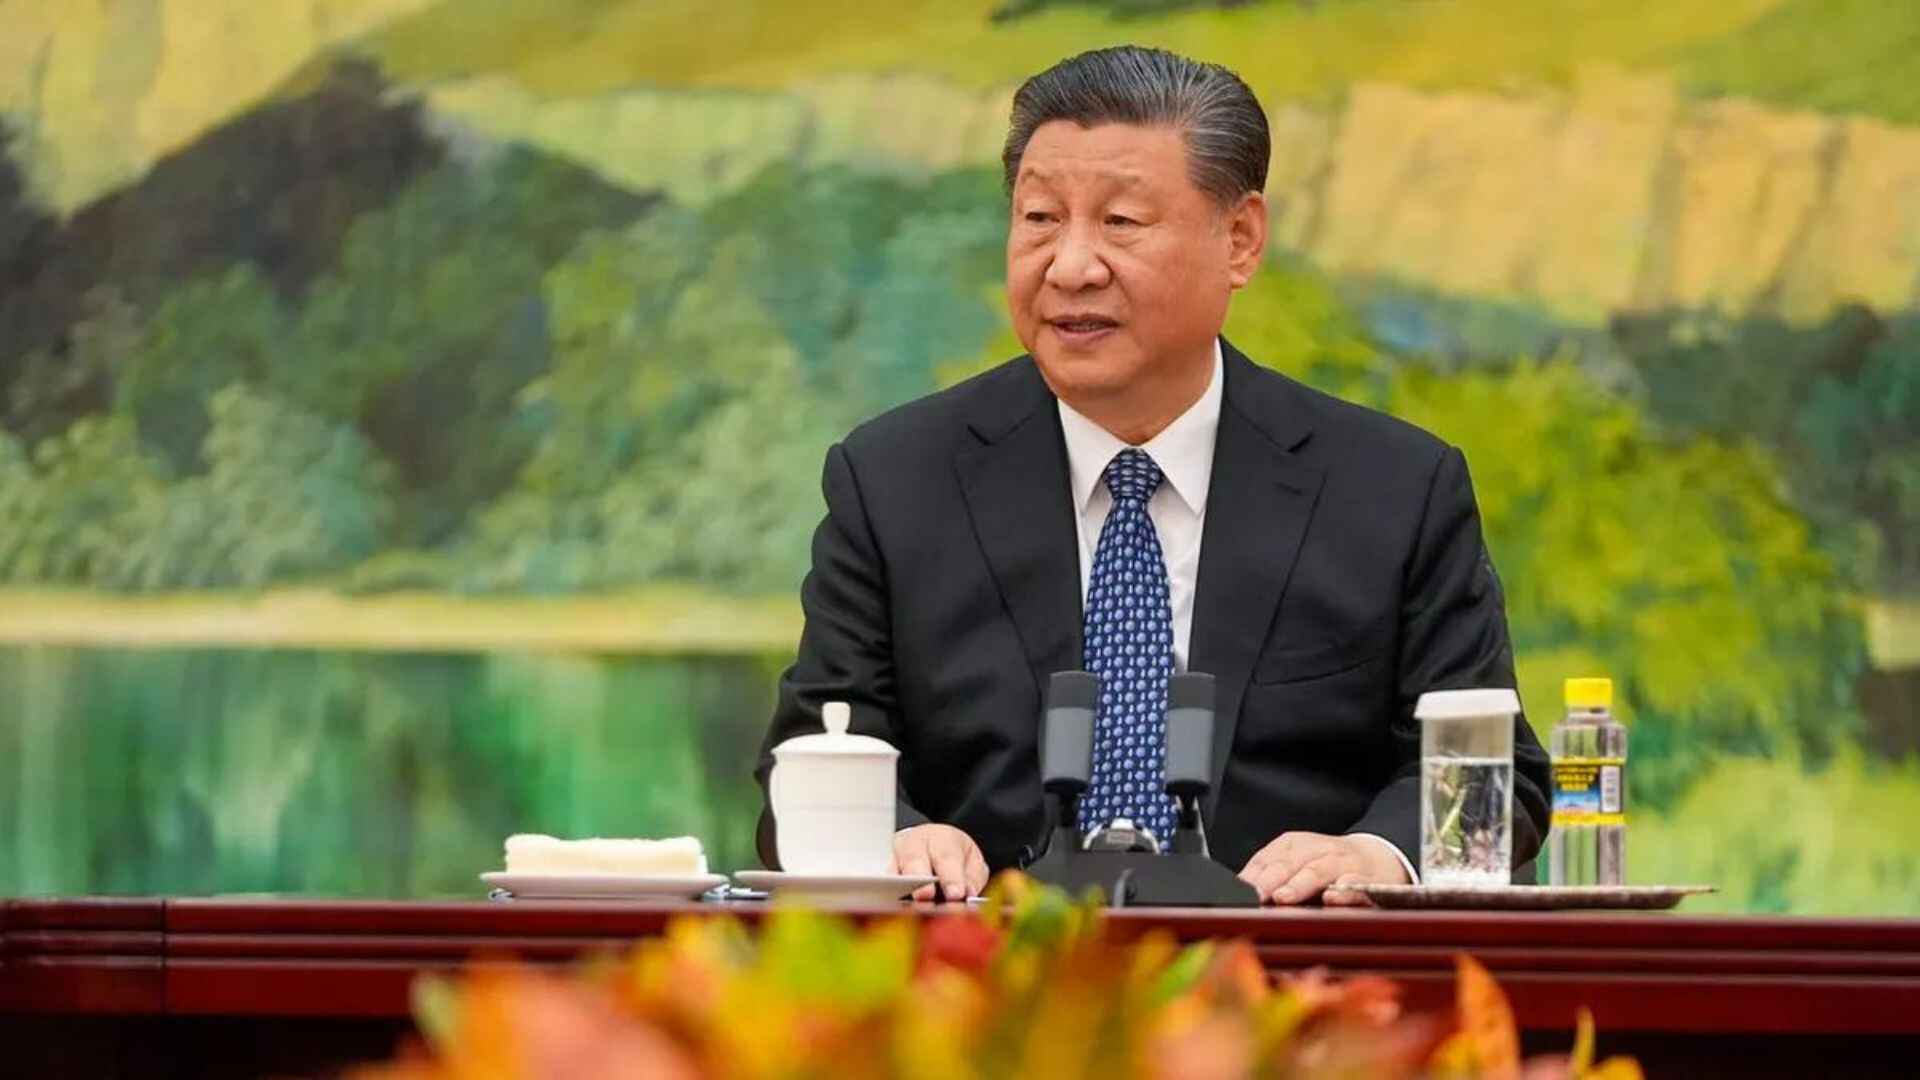 Xi Urges Ideological Education Integration In Chinese Schools: Report